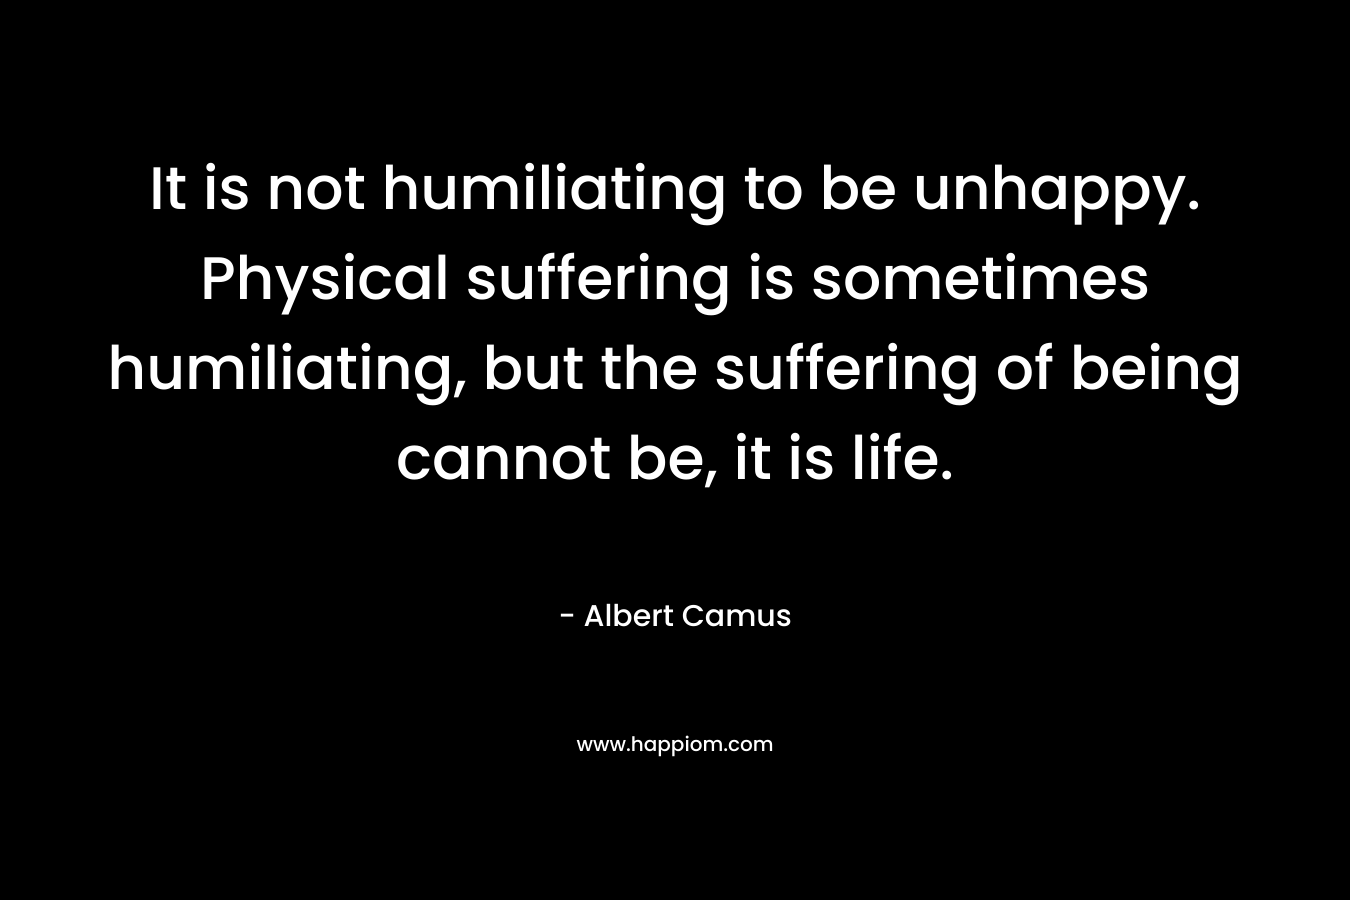 It is not humiliating to be unhappy. Physical suffering is sometimes humiliating, but the suffering of being cannot be, it is life.